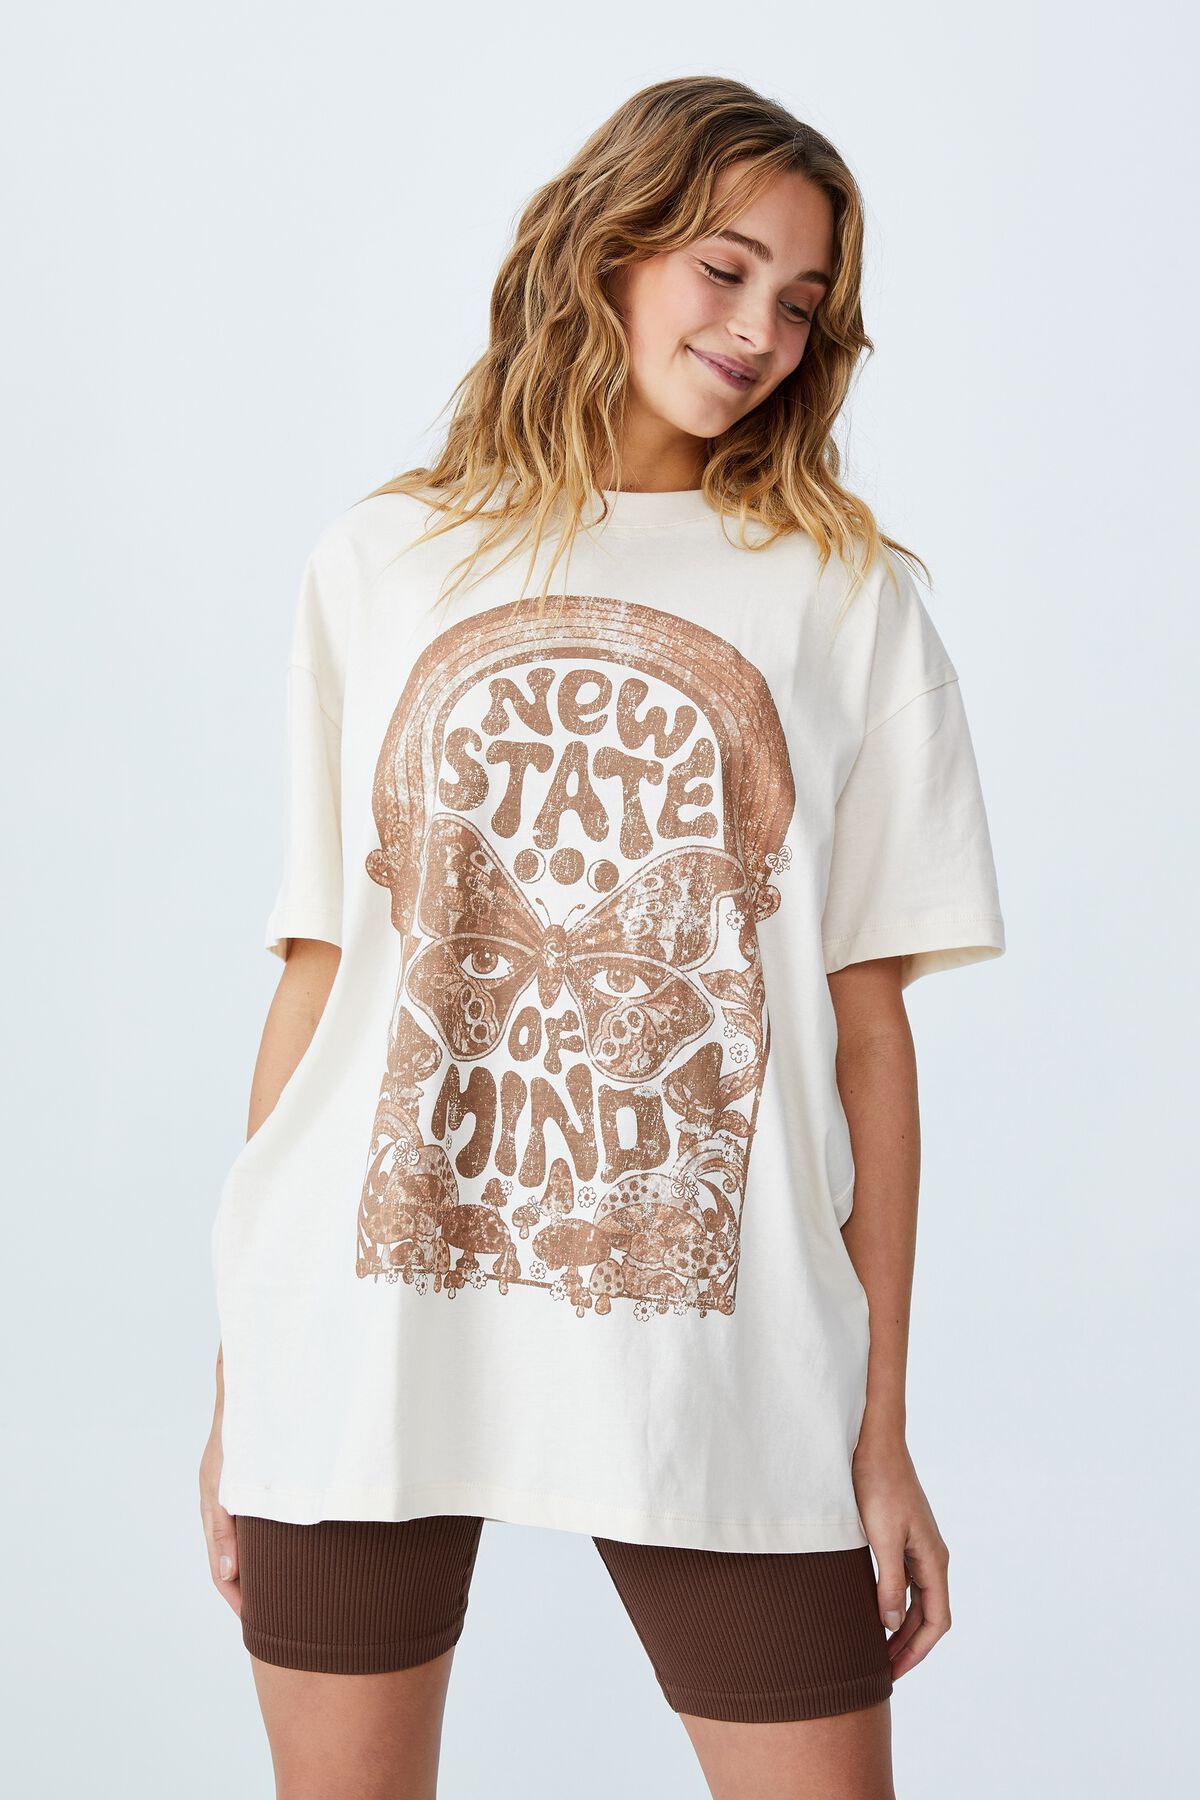 The Relaxed Boyfriend Graphic Tee | Cotton On (ANZ)